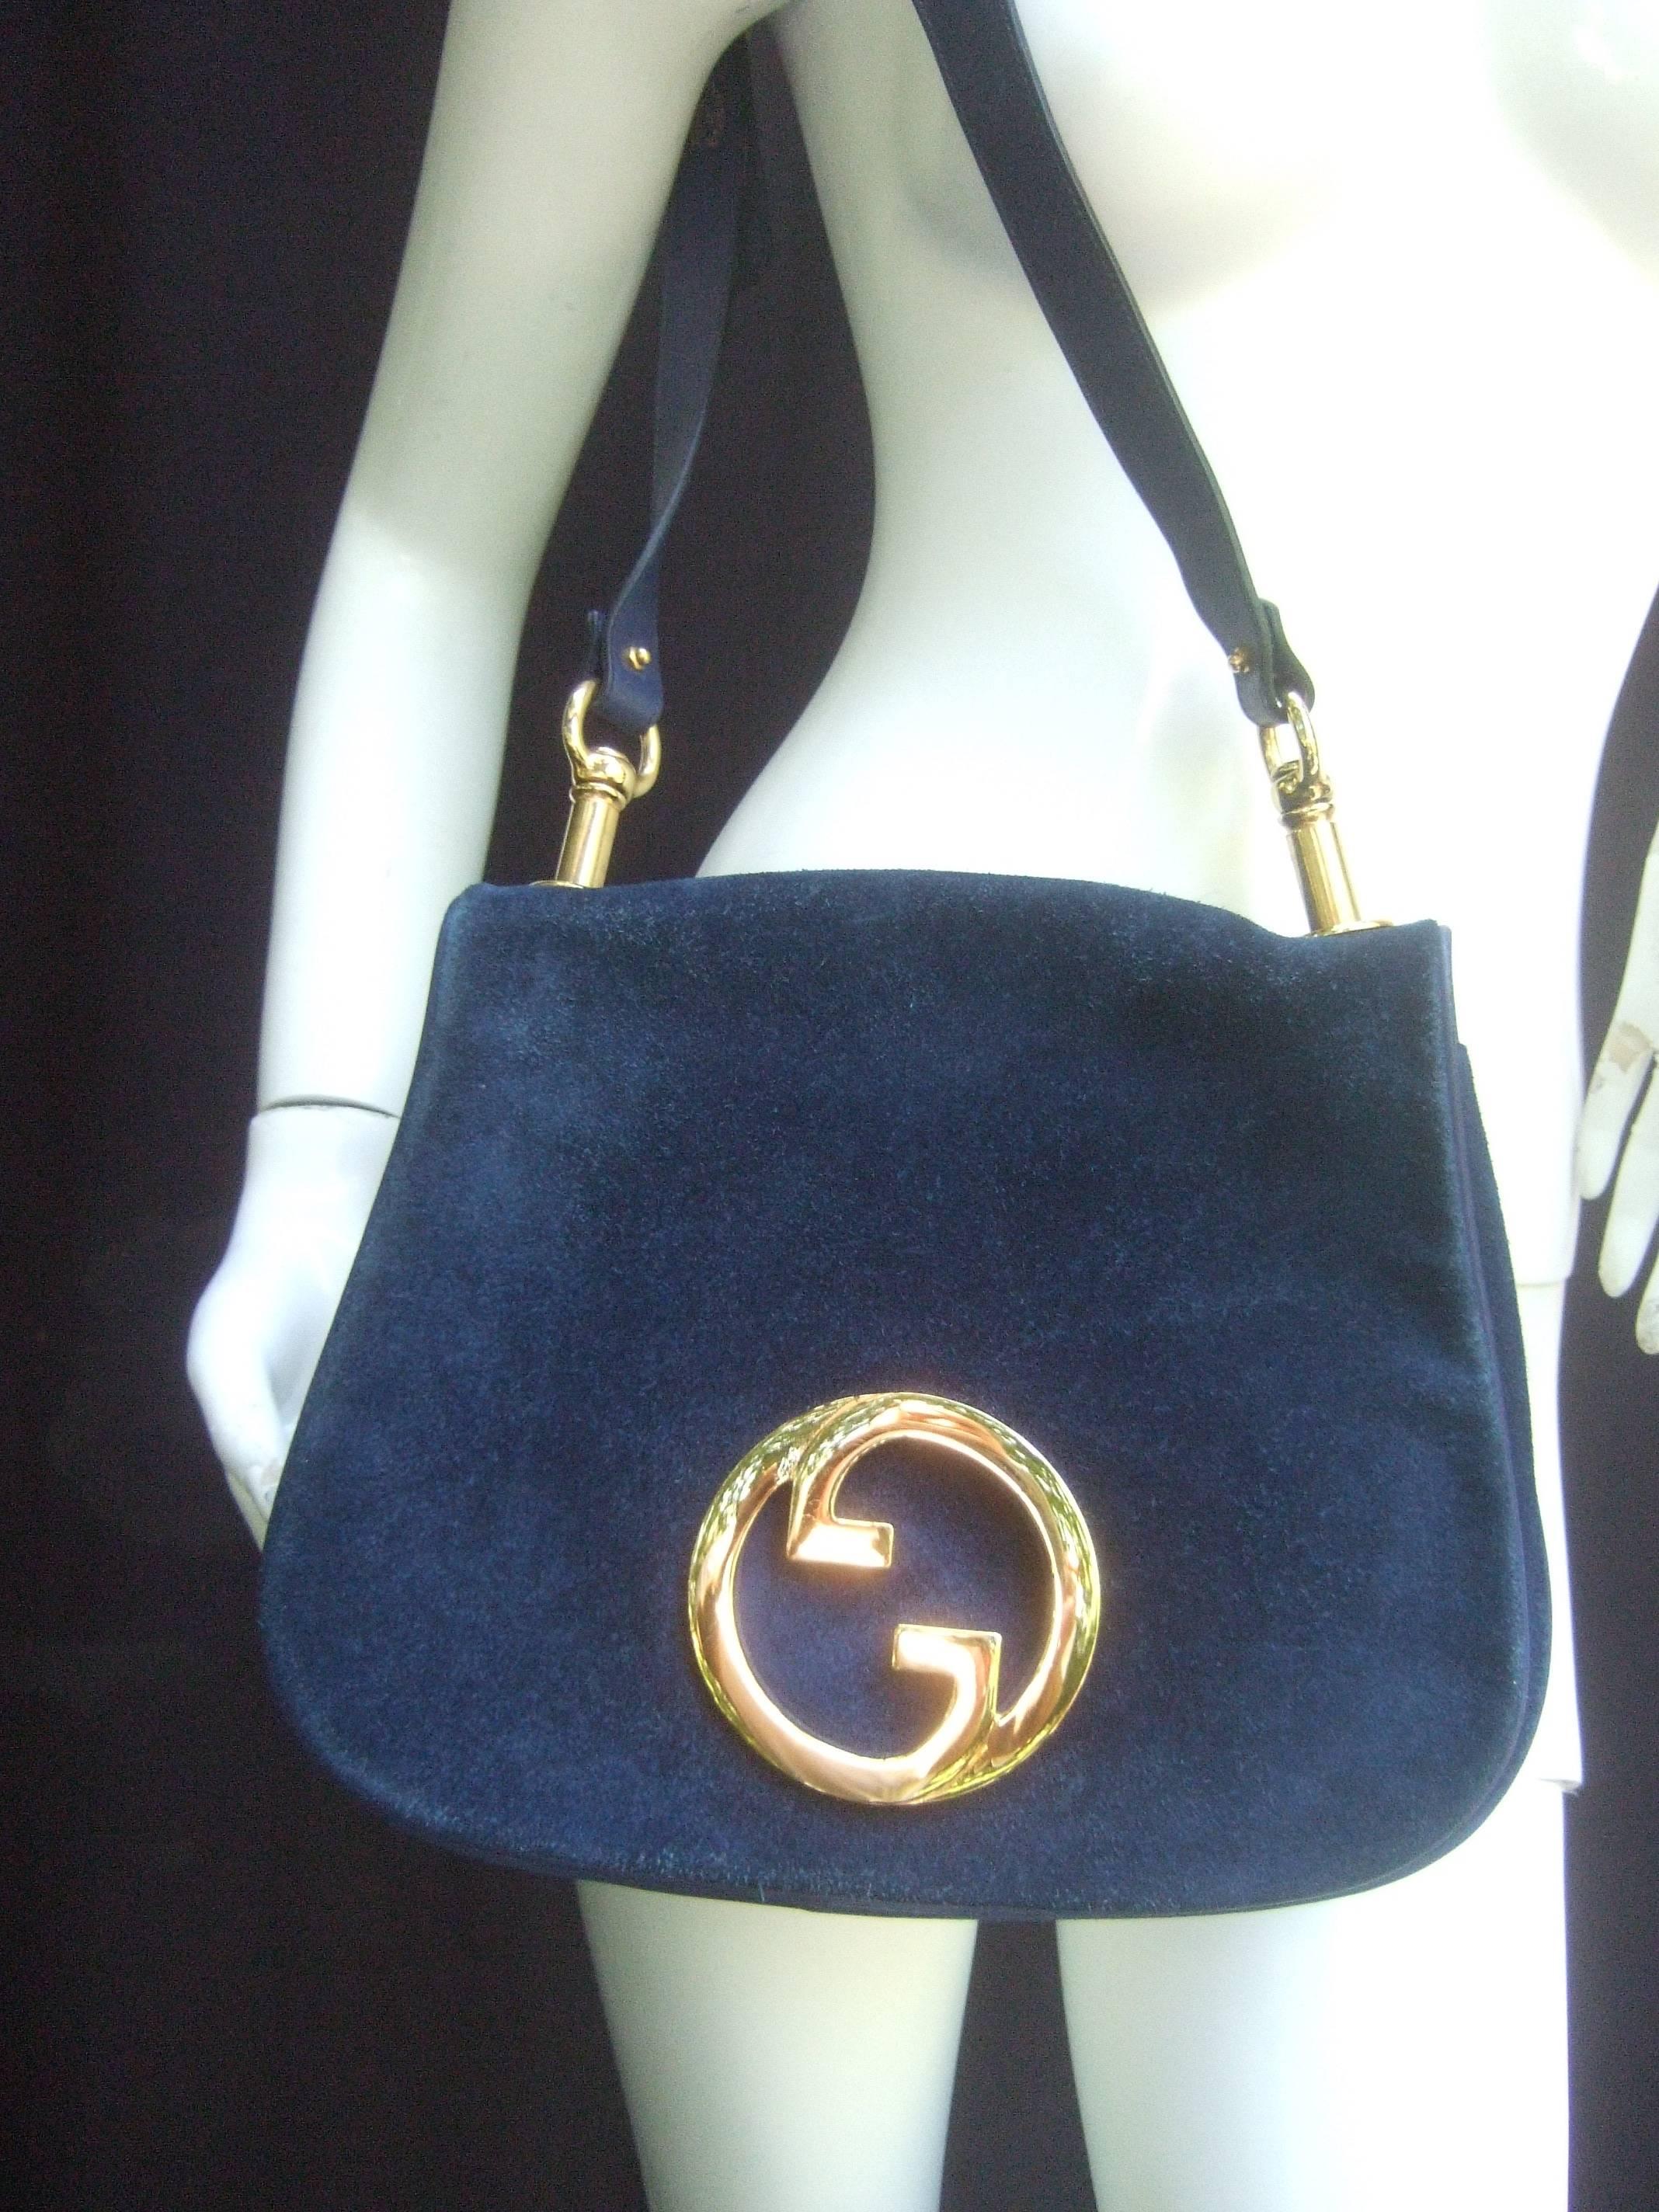 Gucci Italy Rare midnight blue suede shoulder bag c 1970s
The chic designer handbag is covered with luxurious 
blue doeskin suede

Adorned with Gucci's massive interlocked gilt metal
initials. The plush suede covering is accented with 
a blue